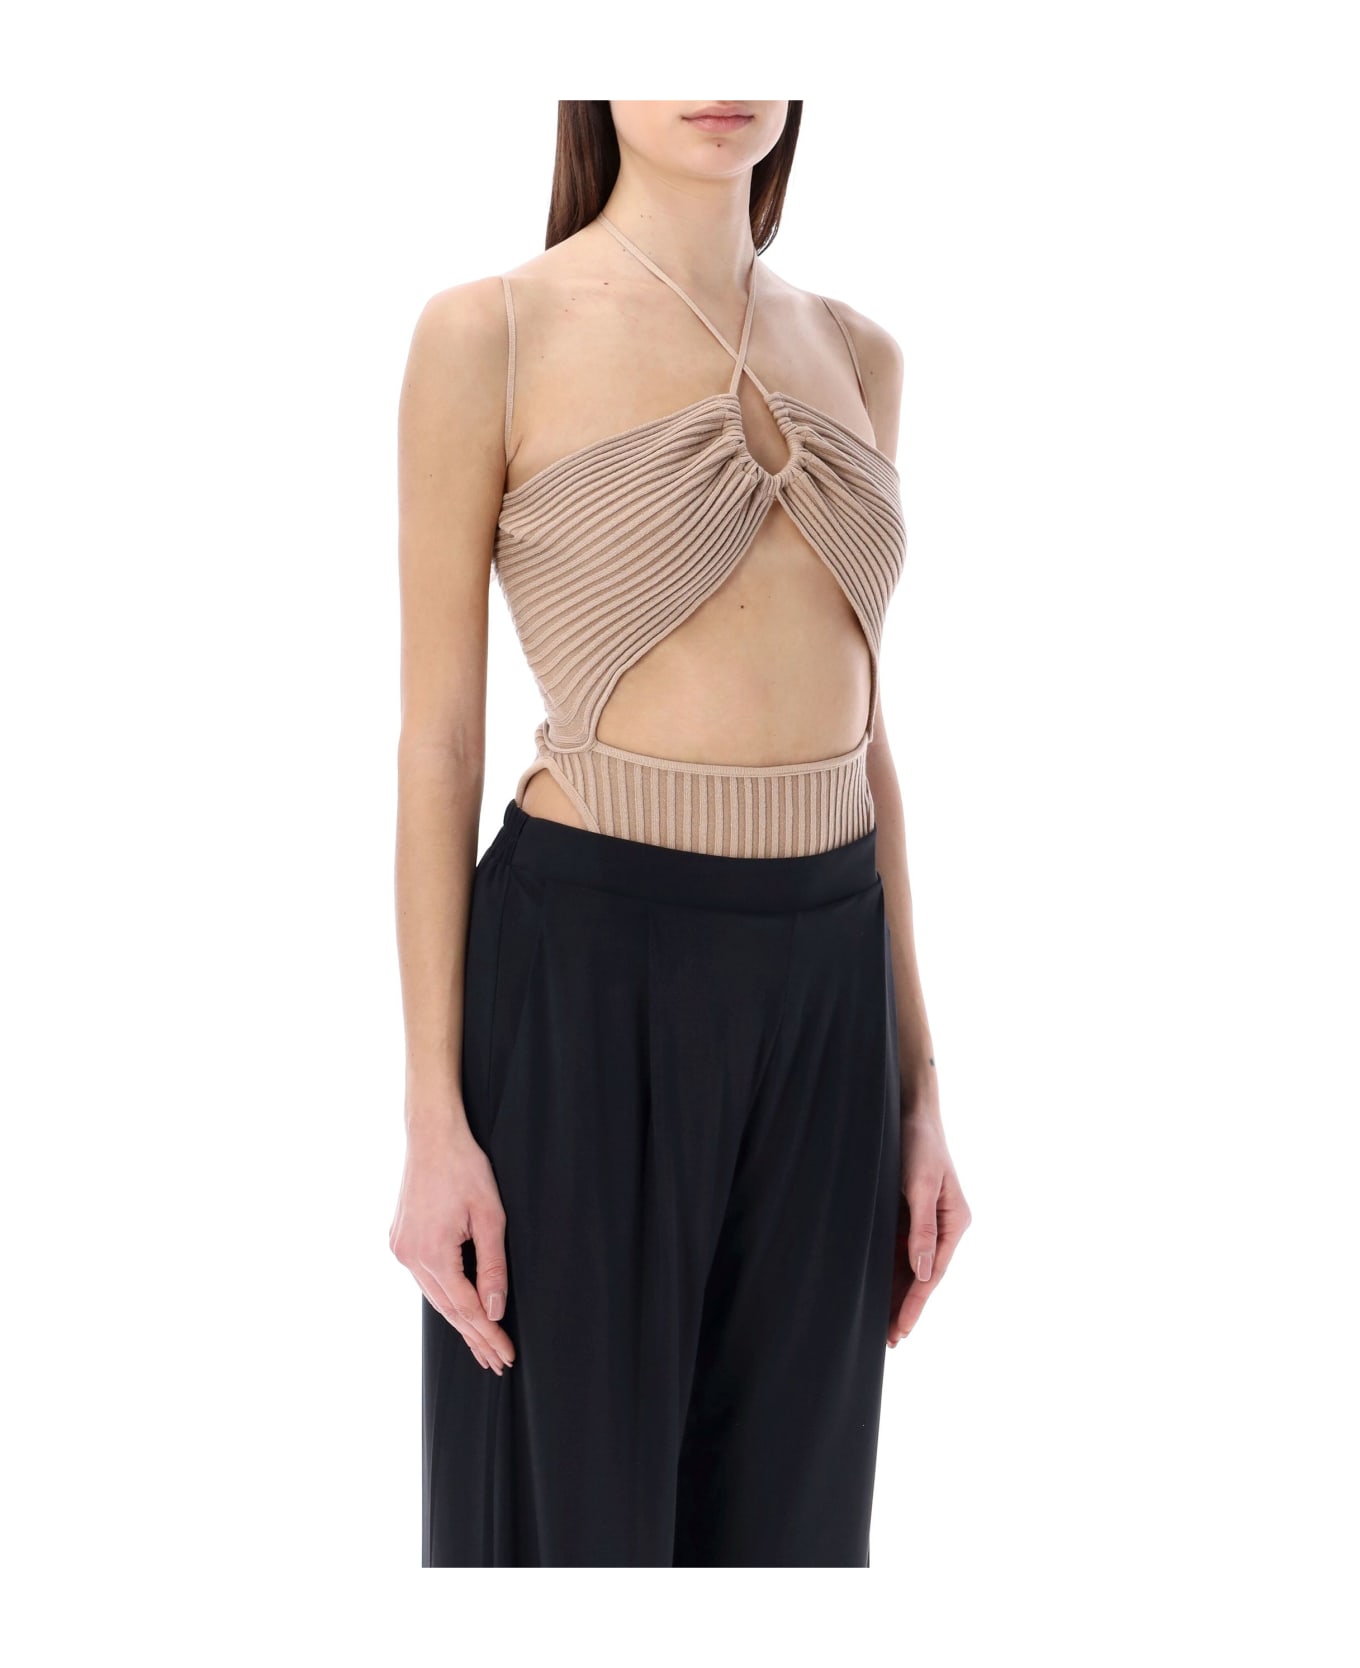 ANDREĀDAMO Ribbed Knit Sleeveless Bodysuit With Cut - NUDE ボトムス